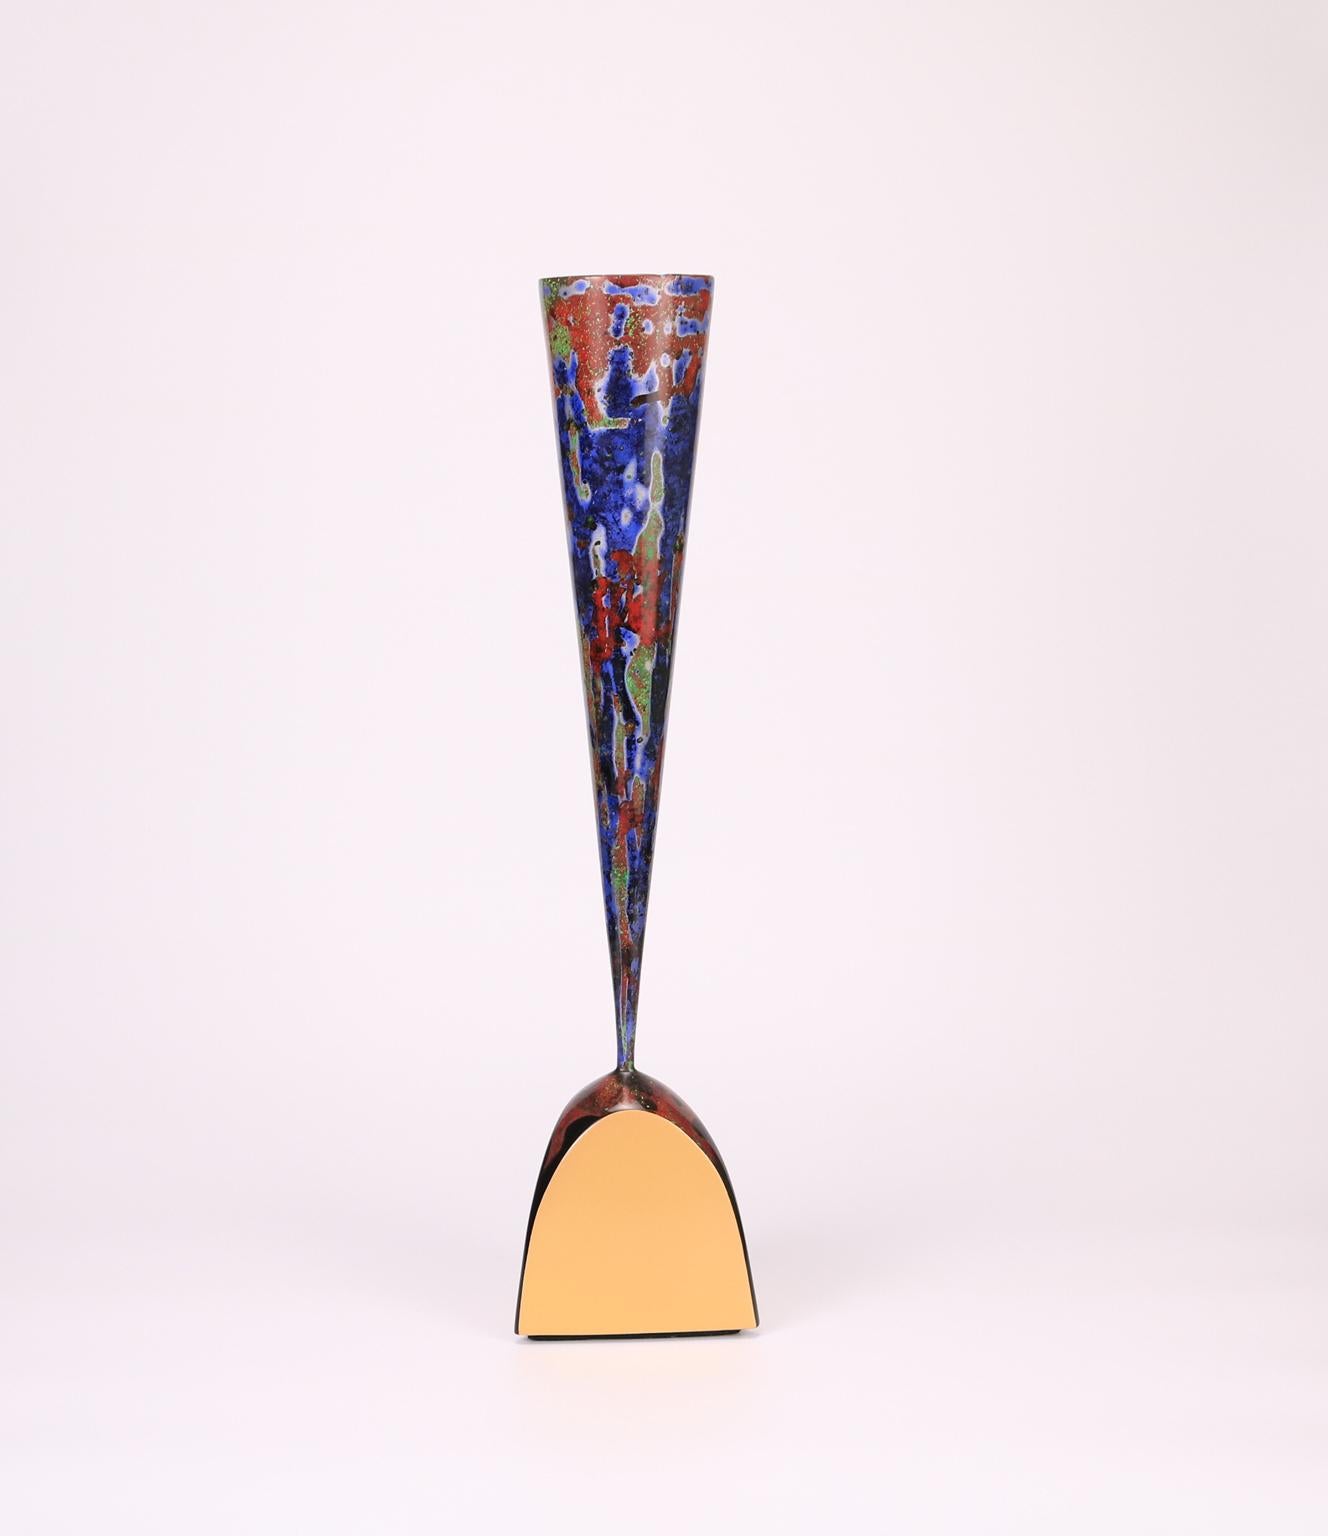 A bold statement of character and fierce personality qualify this ultramodern flamboyant vessel featuring a colorful dry lacquer decoration and  a 24-karat gold lacquer accent. Vermillion, neon green, black, pink, ultramarine blue, silver and gold